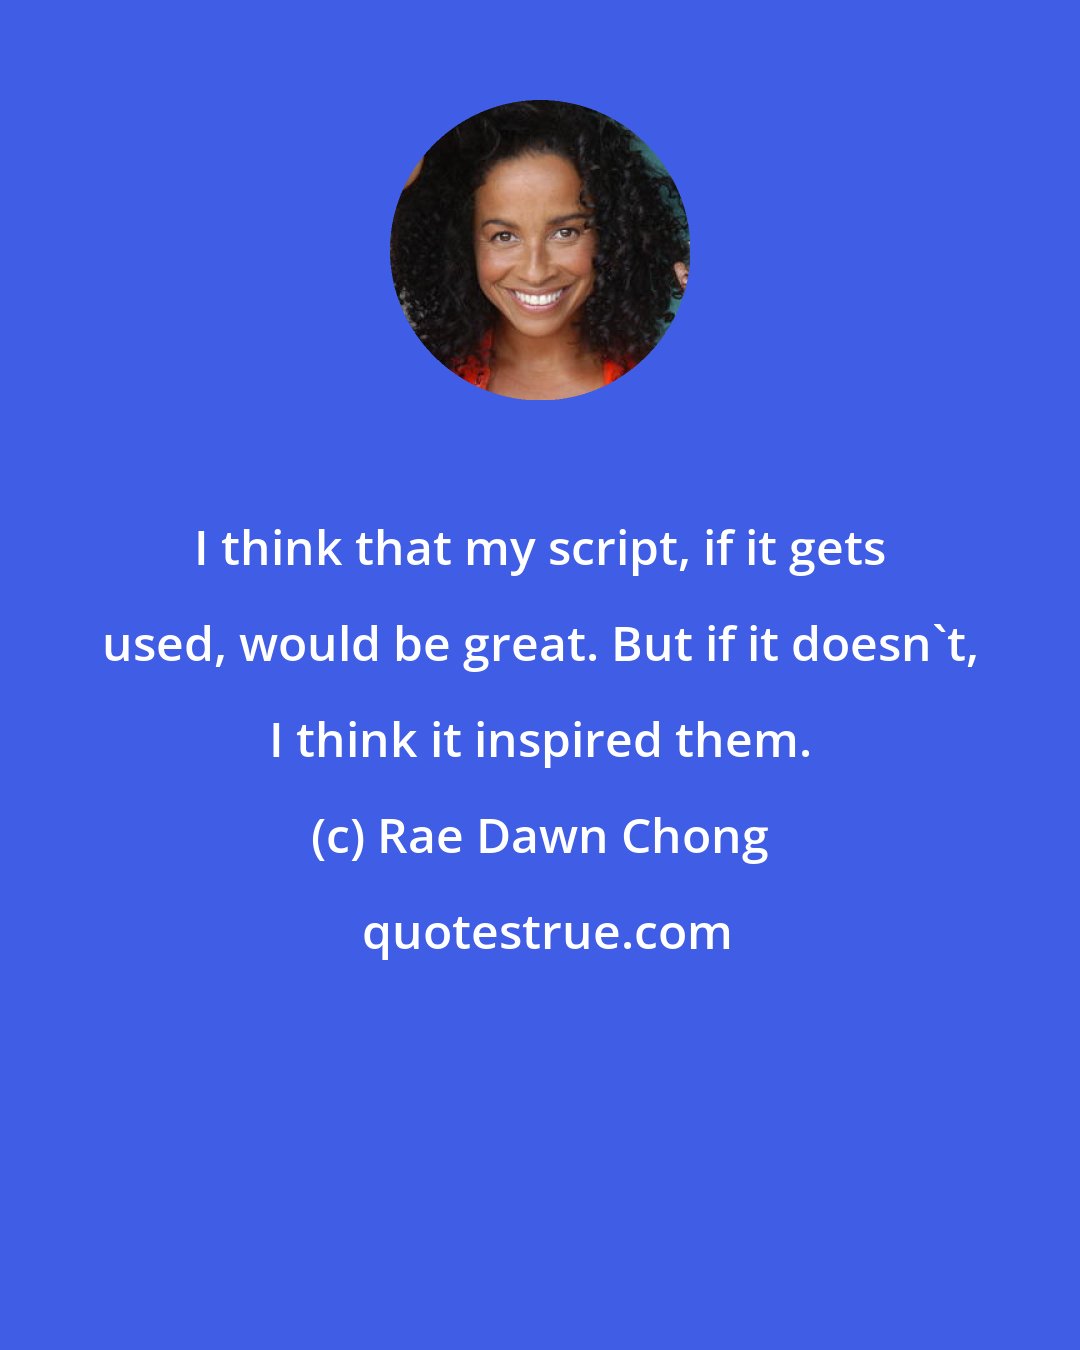 Rae Dawn Chong: I think that my script, if it gets used, would be great. But if it doesn't, I think it inspired them.